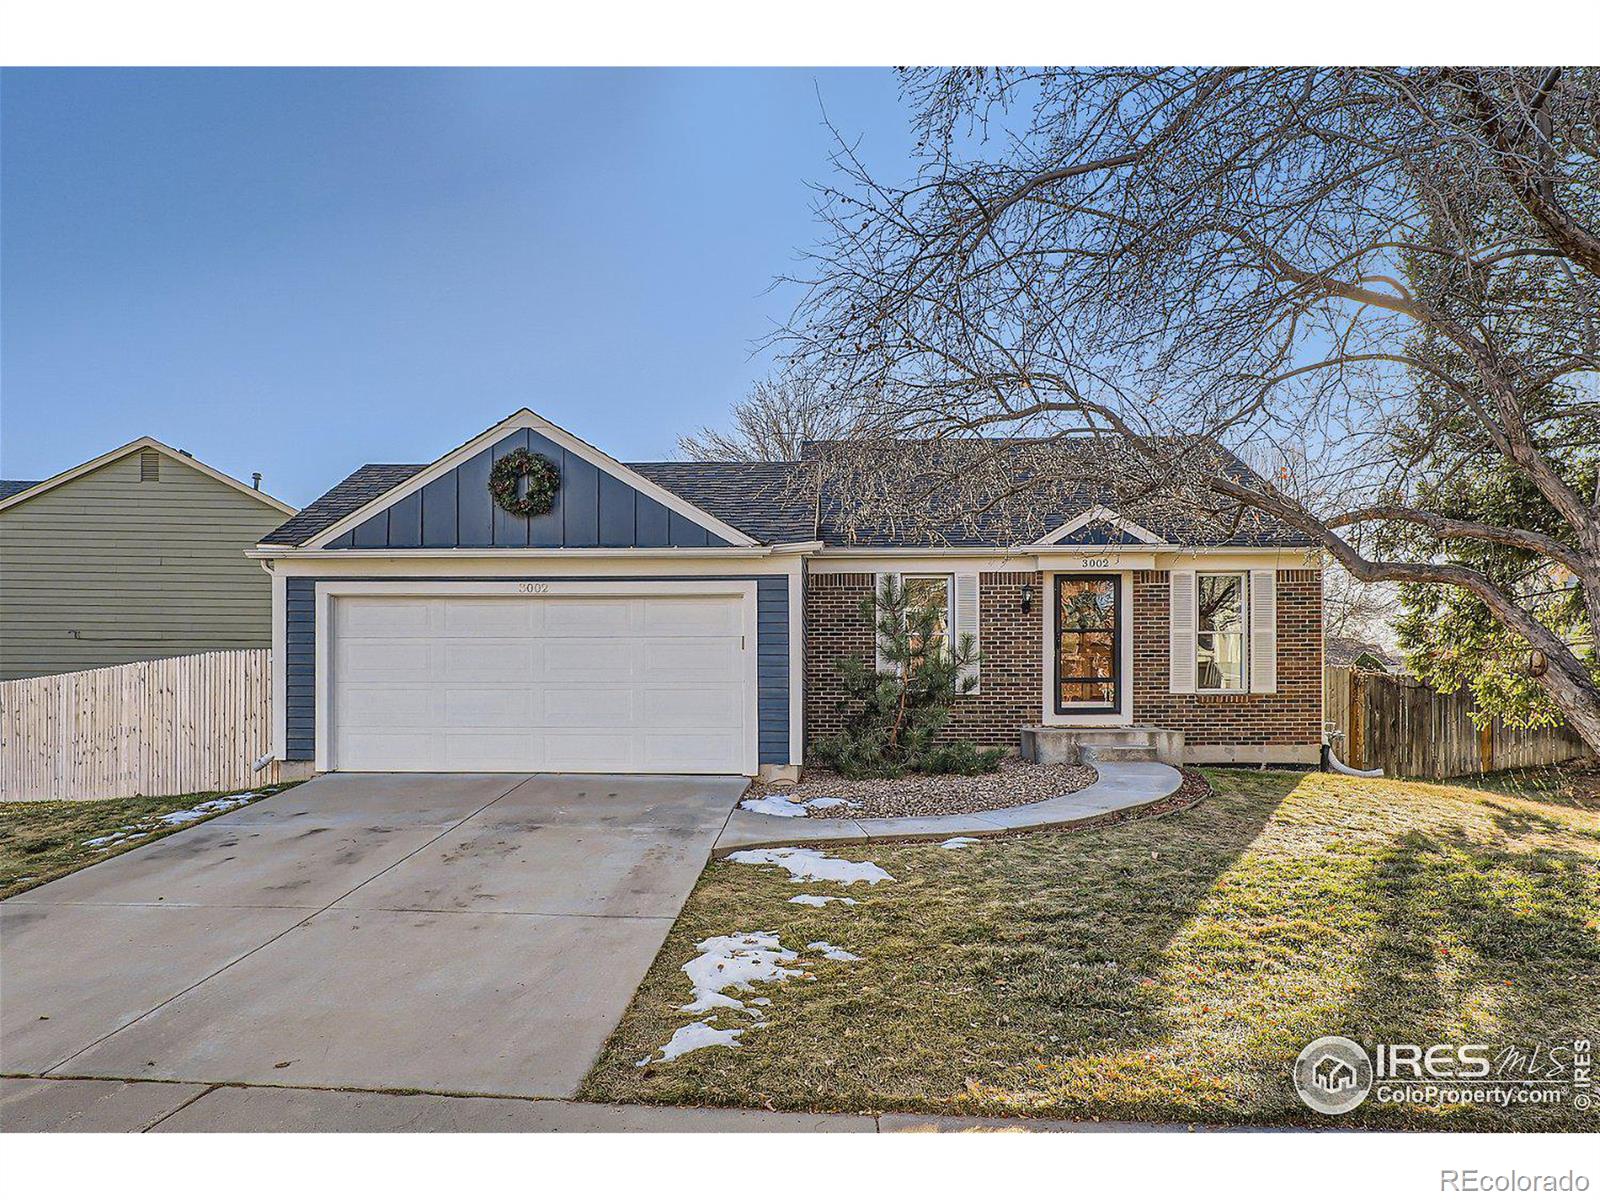 3002 w 127th avenue, broomfield sold home. Closed on 2024-02-20 for $500,000.